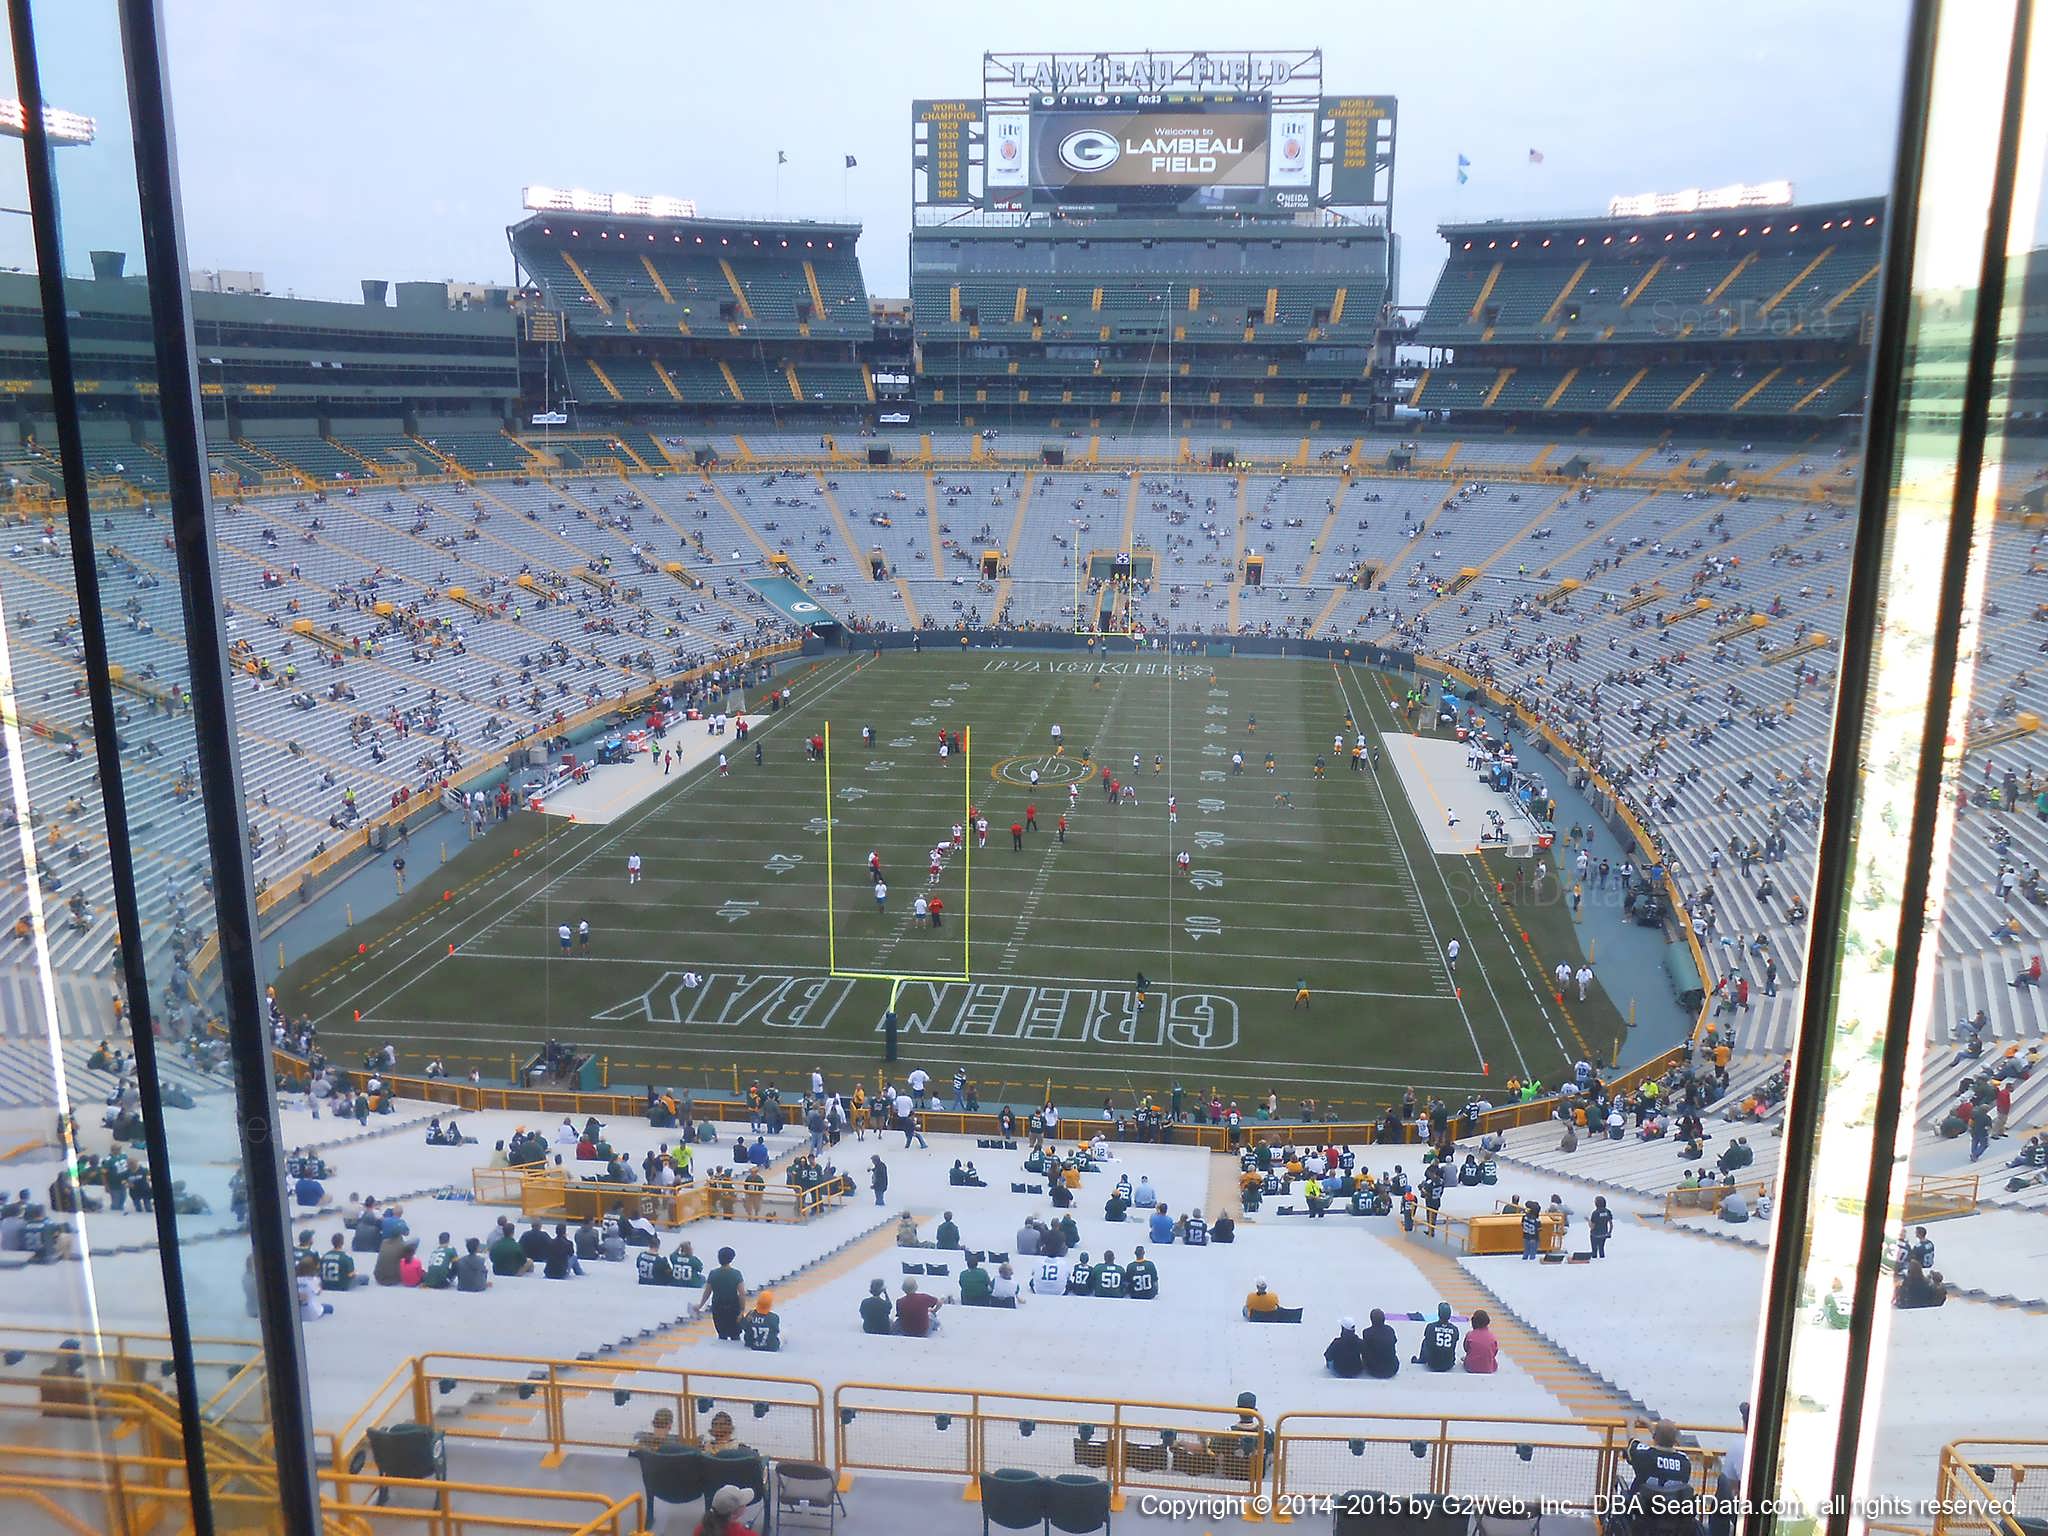 Seat view from section 480 at Lambeau Field, home of the Green Bay Packers